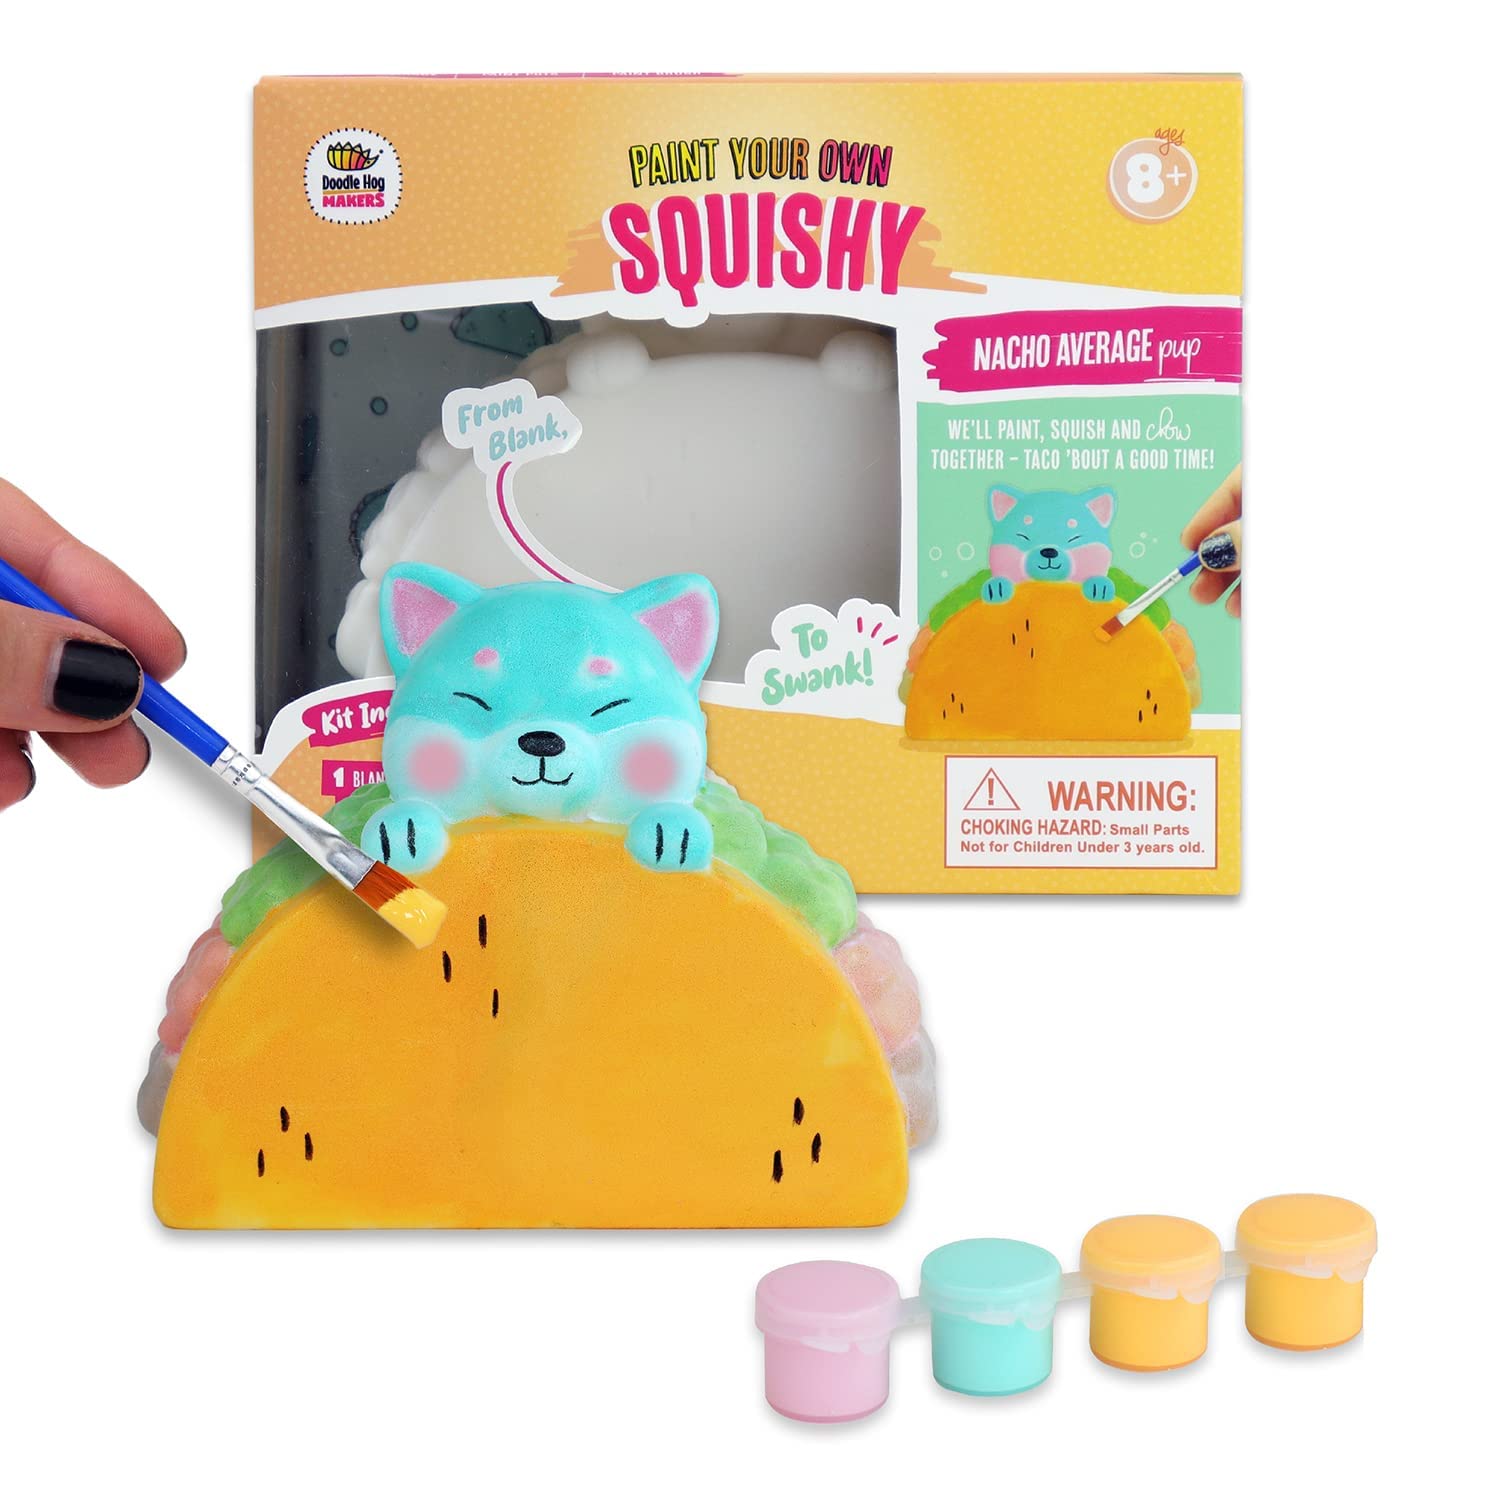 Doodle Hog Shiba Inu Paint Your Own Squishies Kit Crafts For Girls 8-12,  Gifts For Kids And Tweens, Kids Art Painting Kit 6 7 9